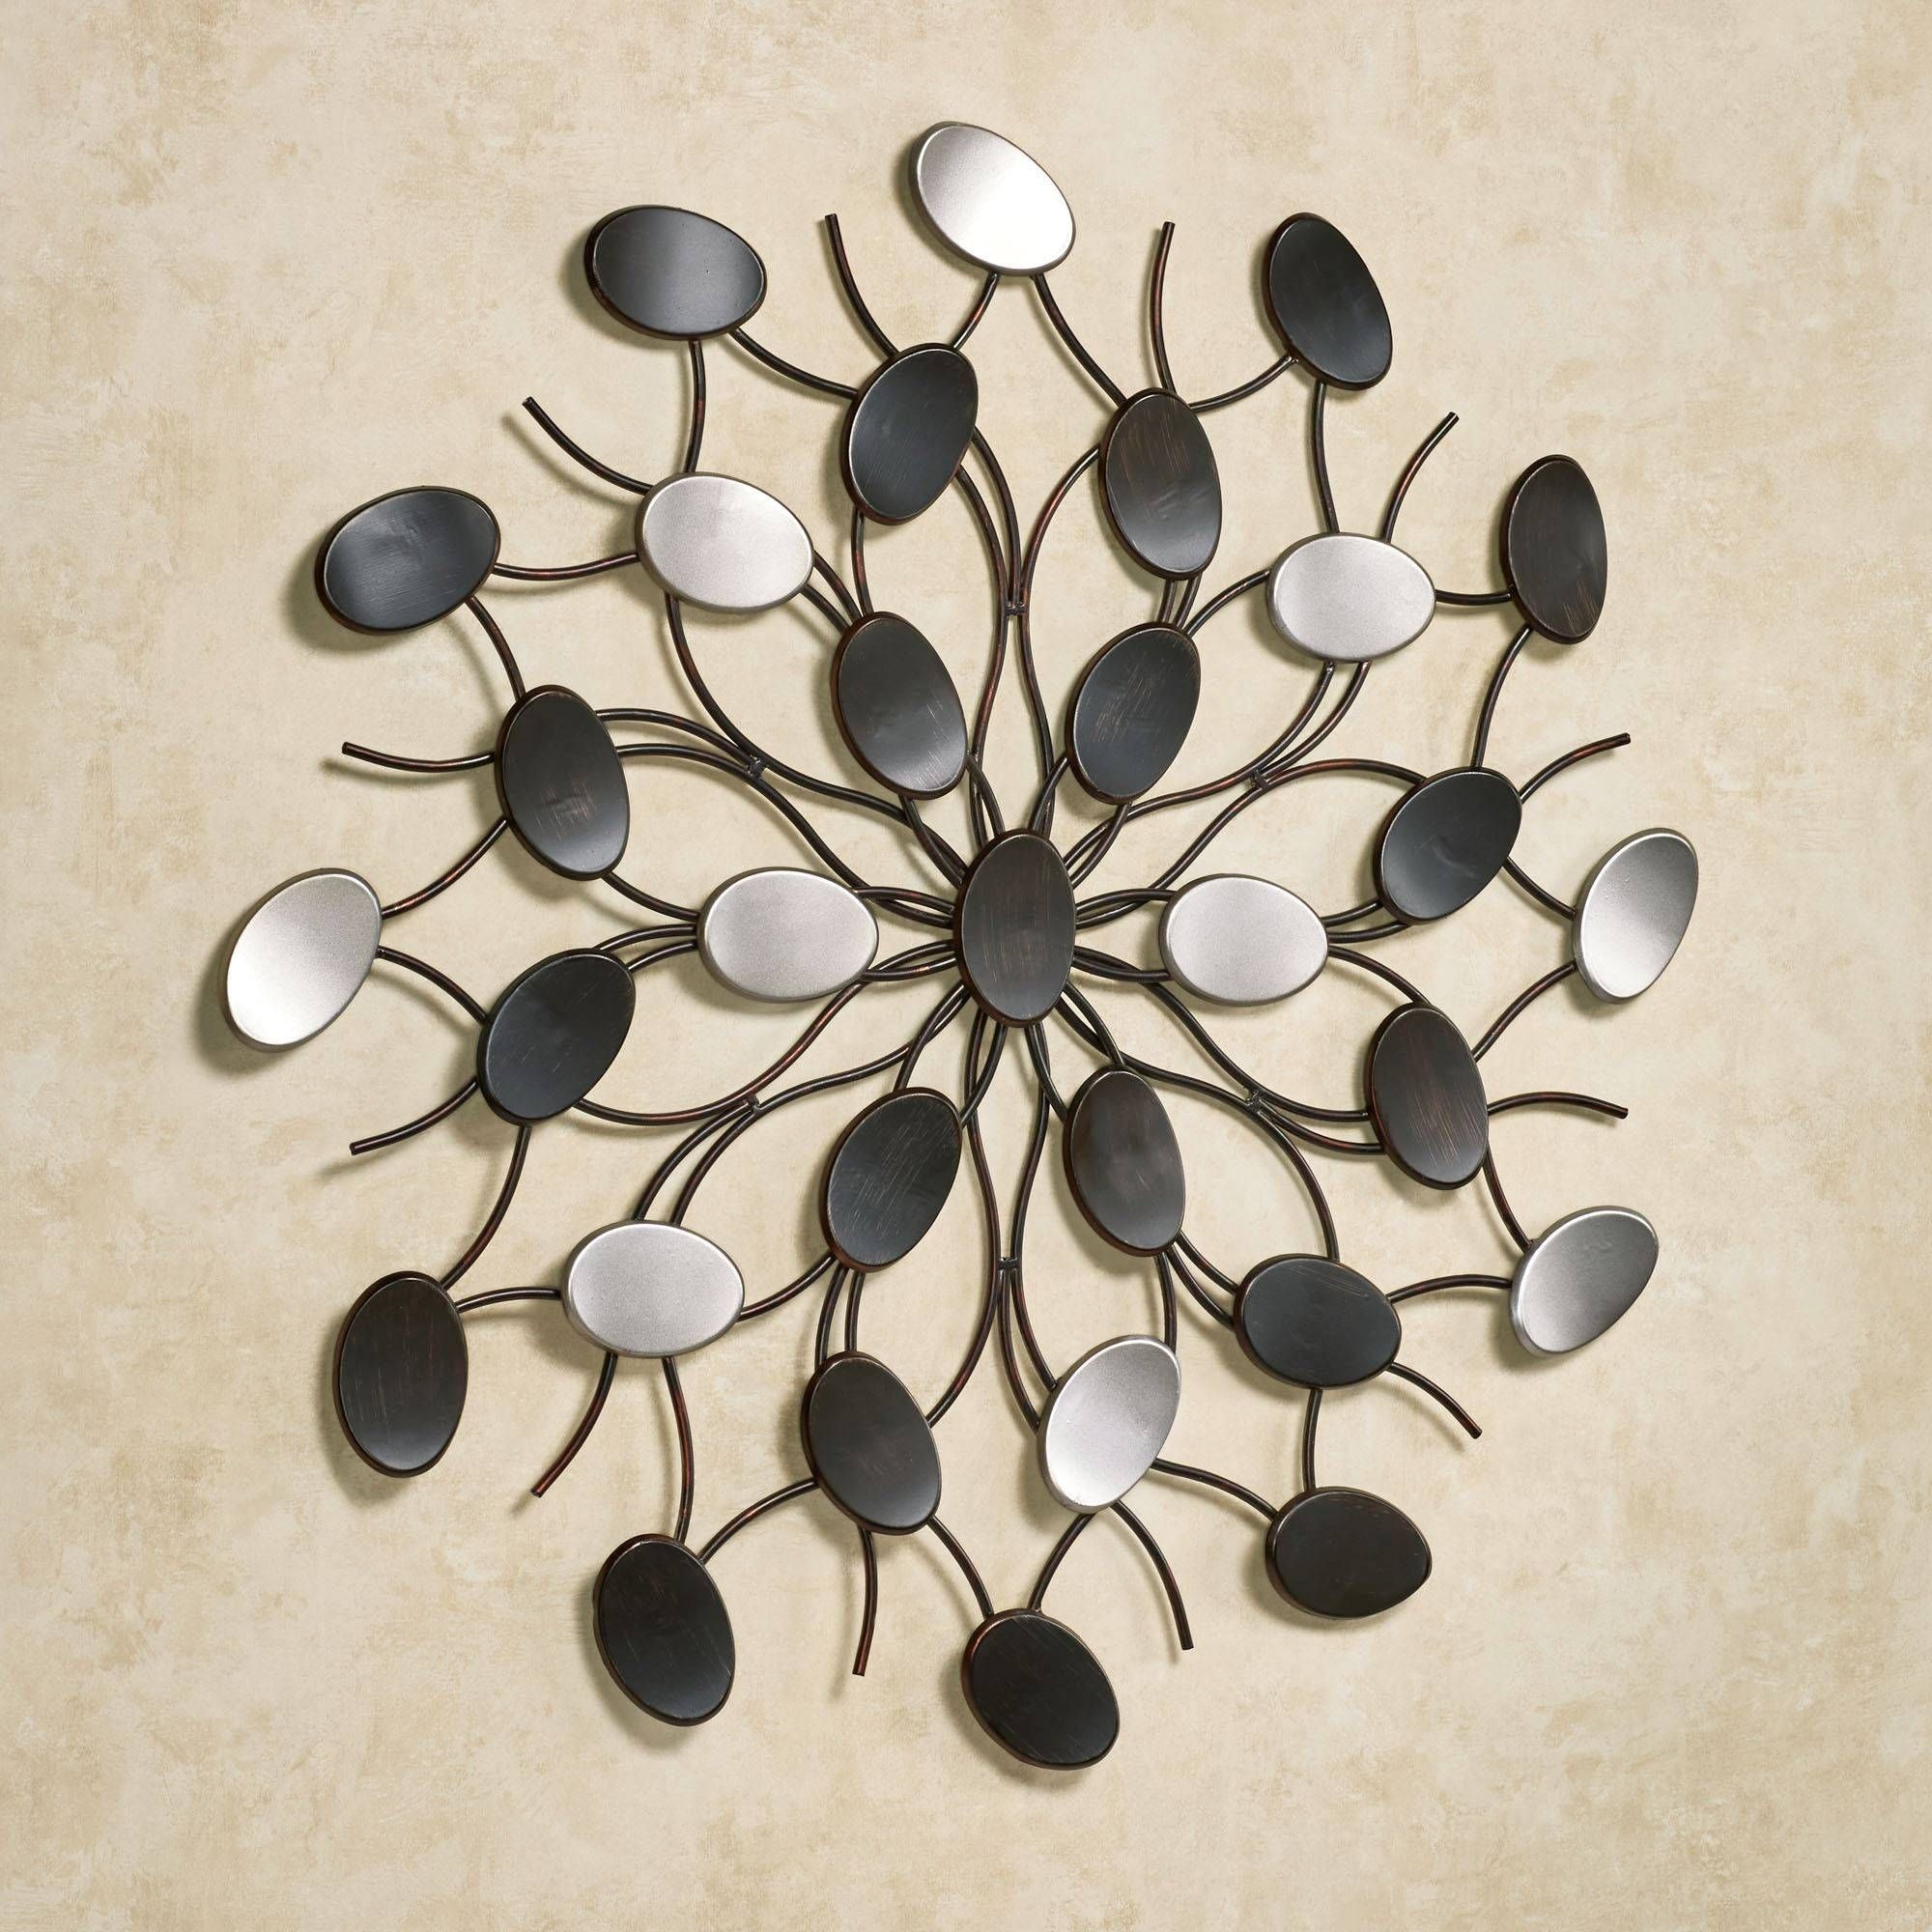 Radiant Petals Abstract Metal Wall Art Regarding Most Recently Released Metal Wall Art (View 1 of 30)